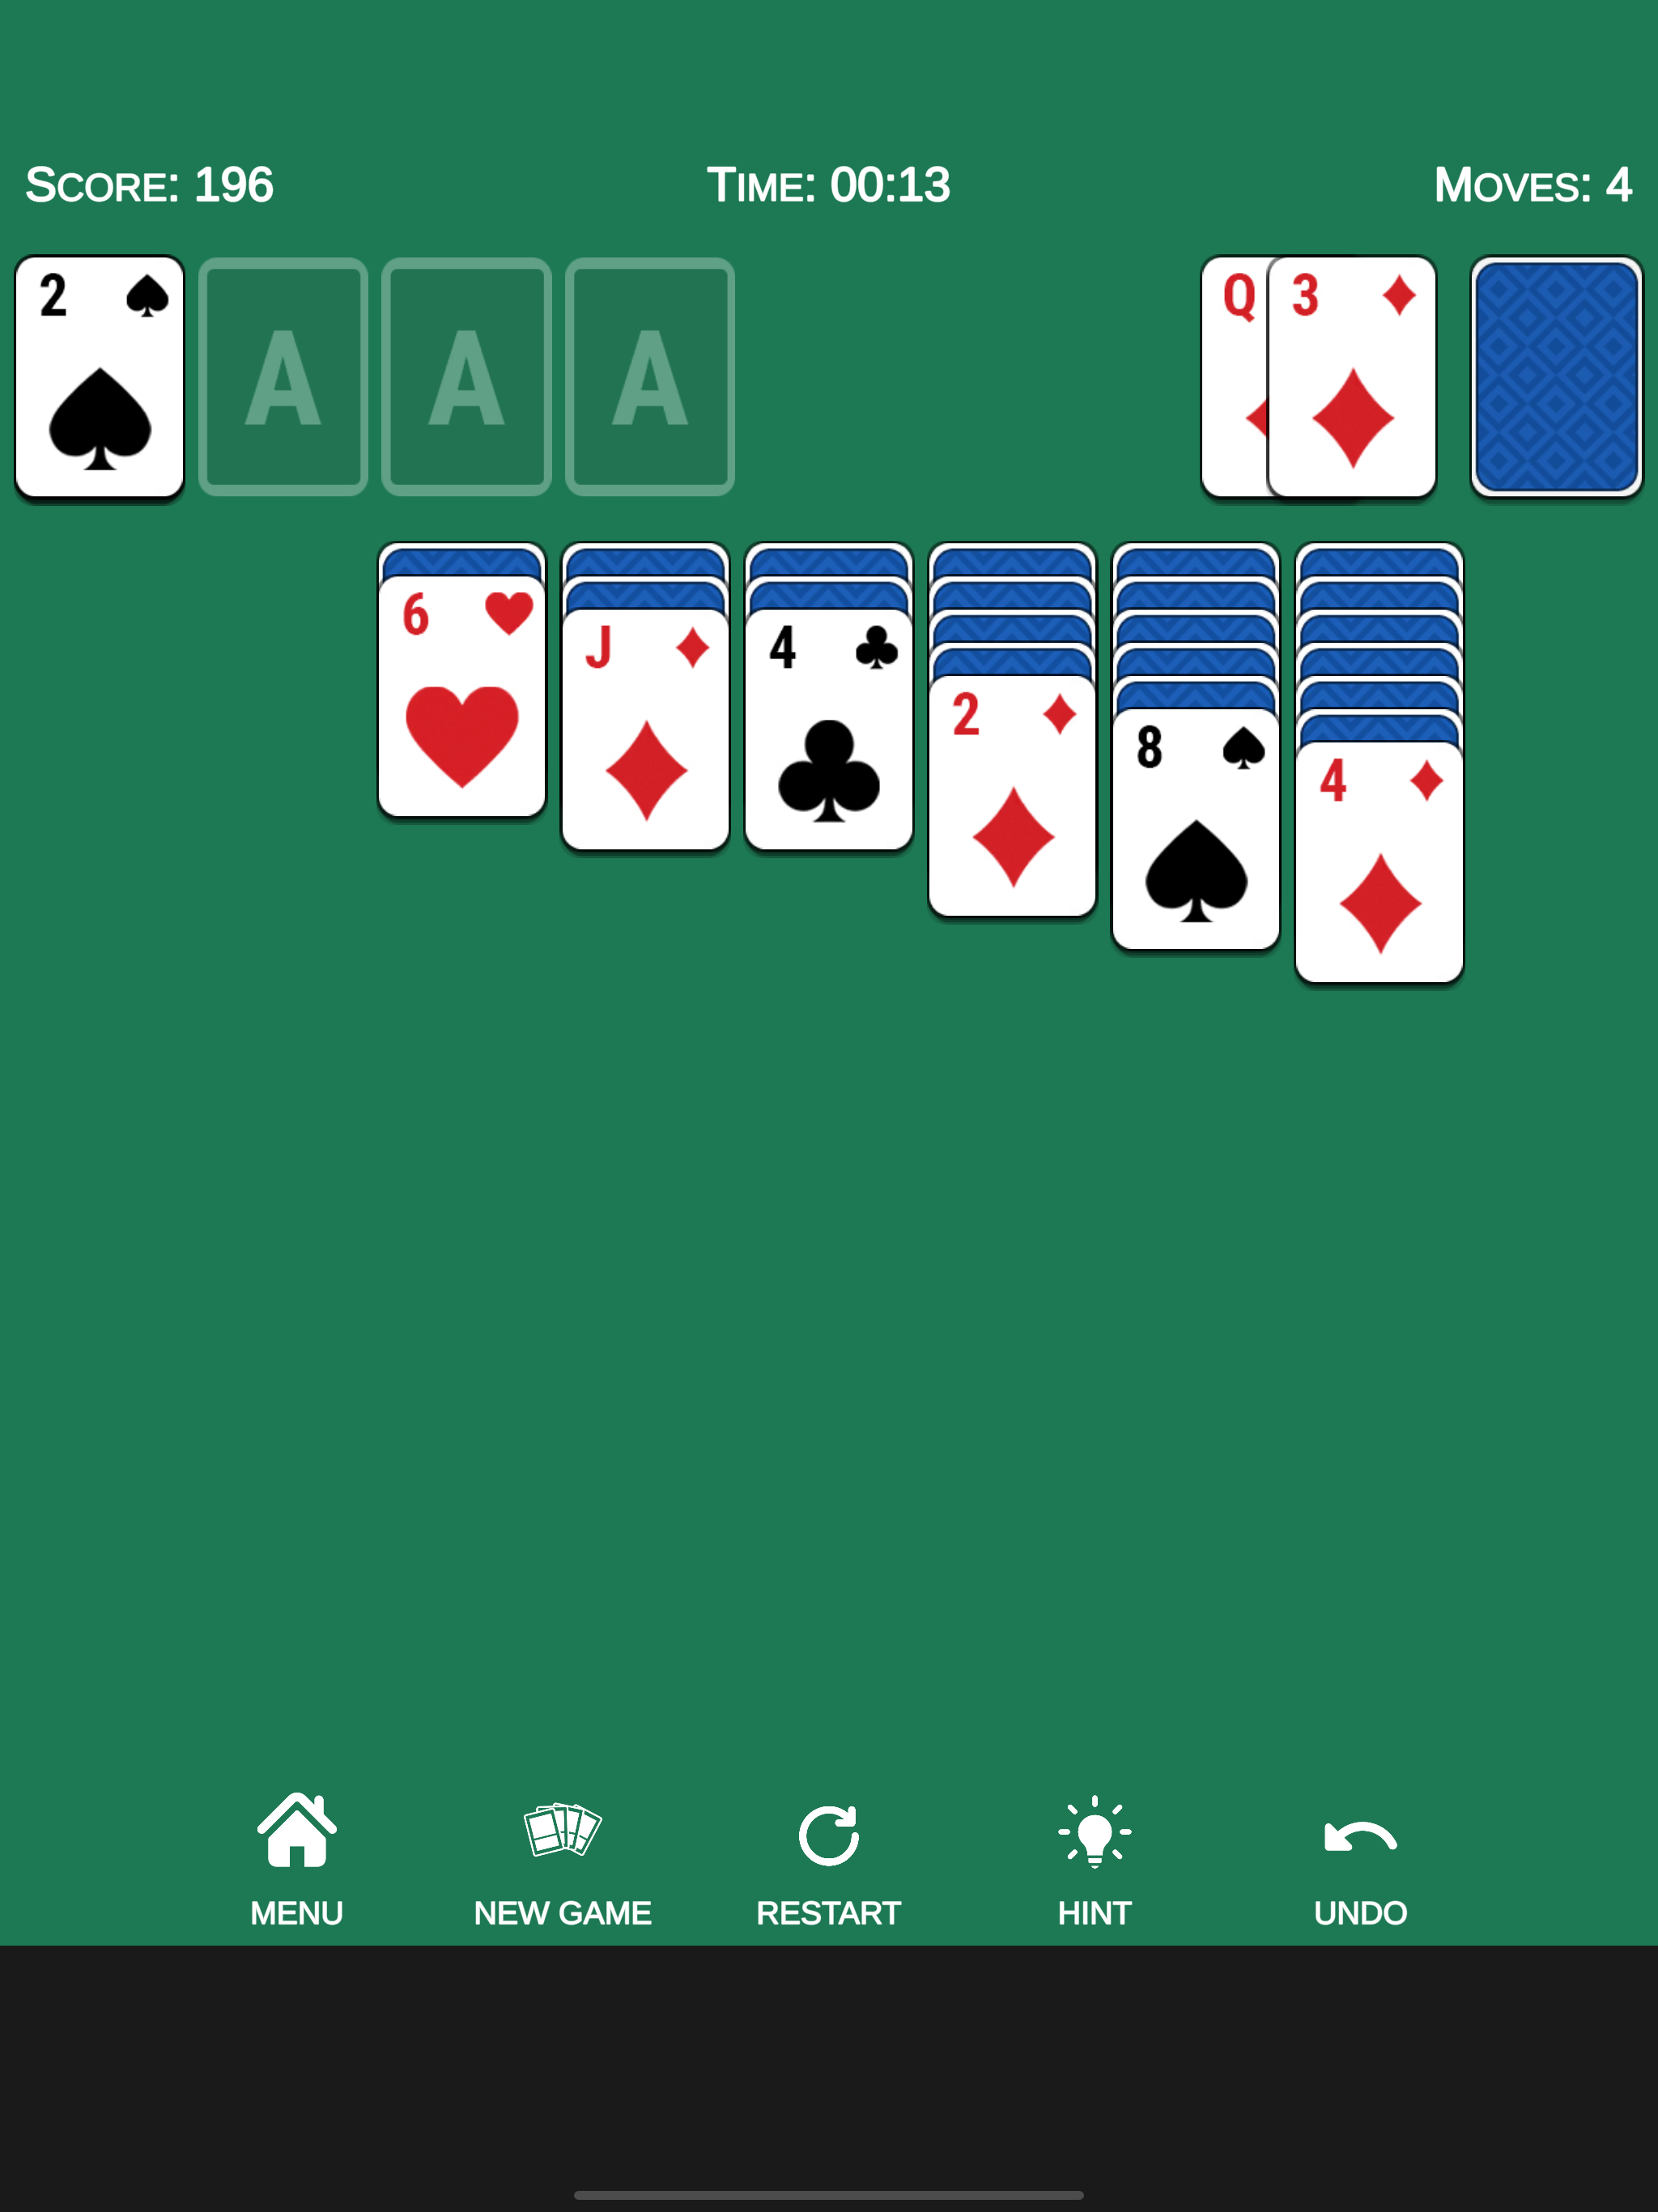 Solitaire: Classic Card Game - Apps on Google Play